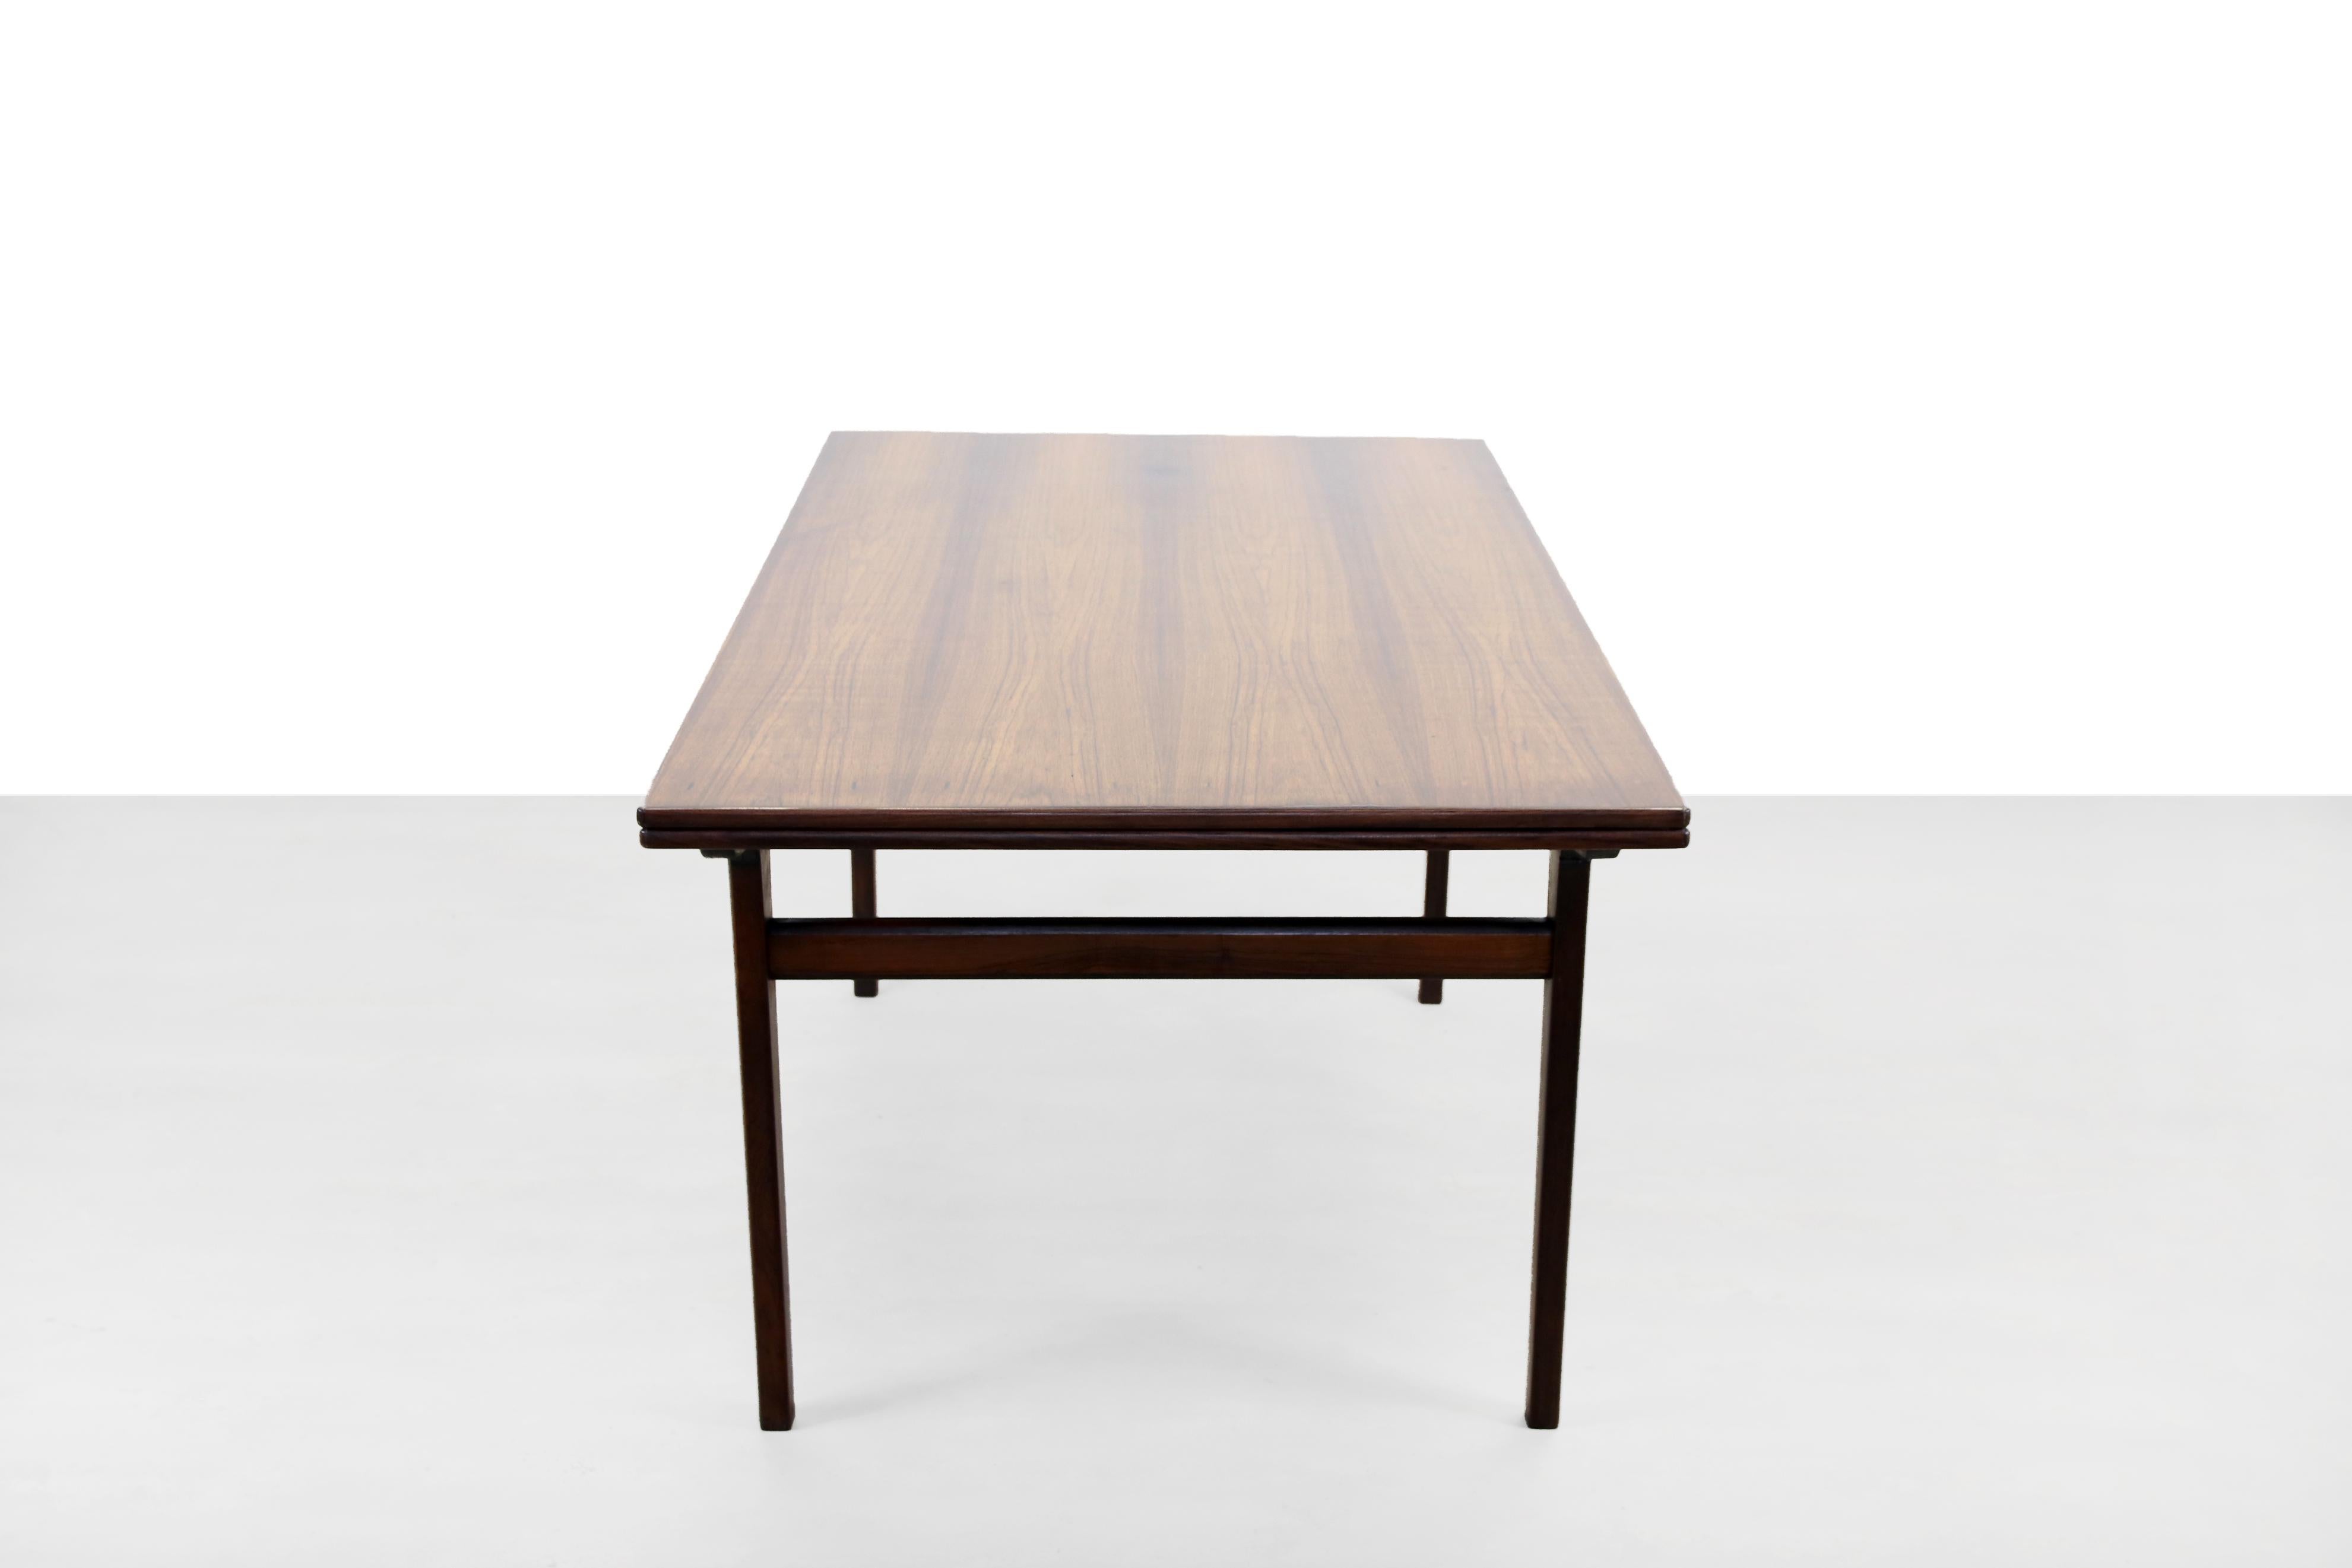 Beautiful large dark teak dining room table designed by the Dane Johannes Andersen. The table has two extra tops that are stylishly incorporated under the top and extendable so that 8-10 people can easily sit at the table. Solid Danish quality and a